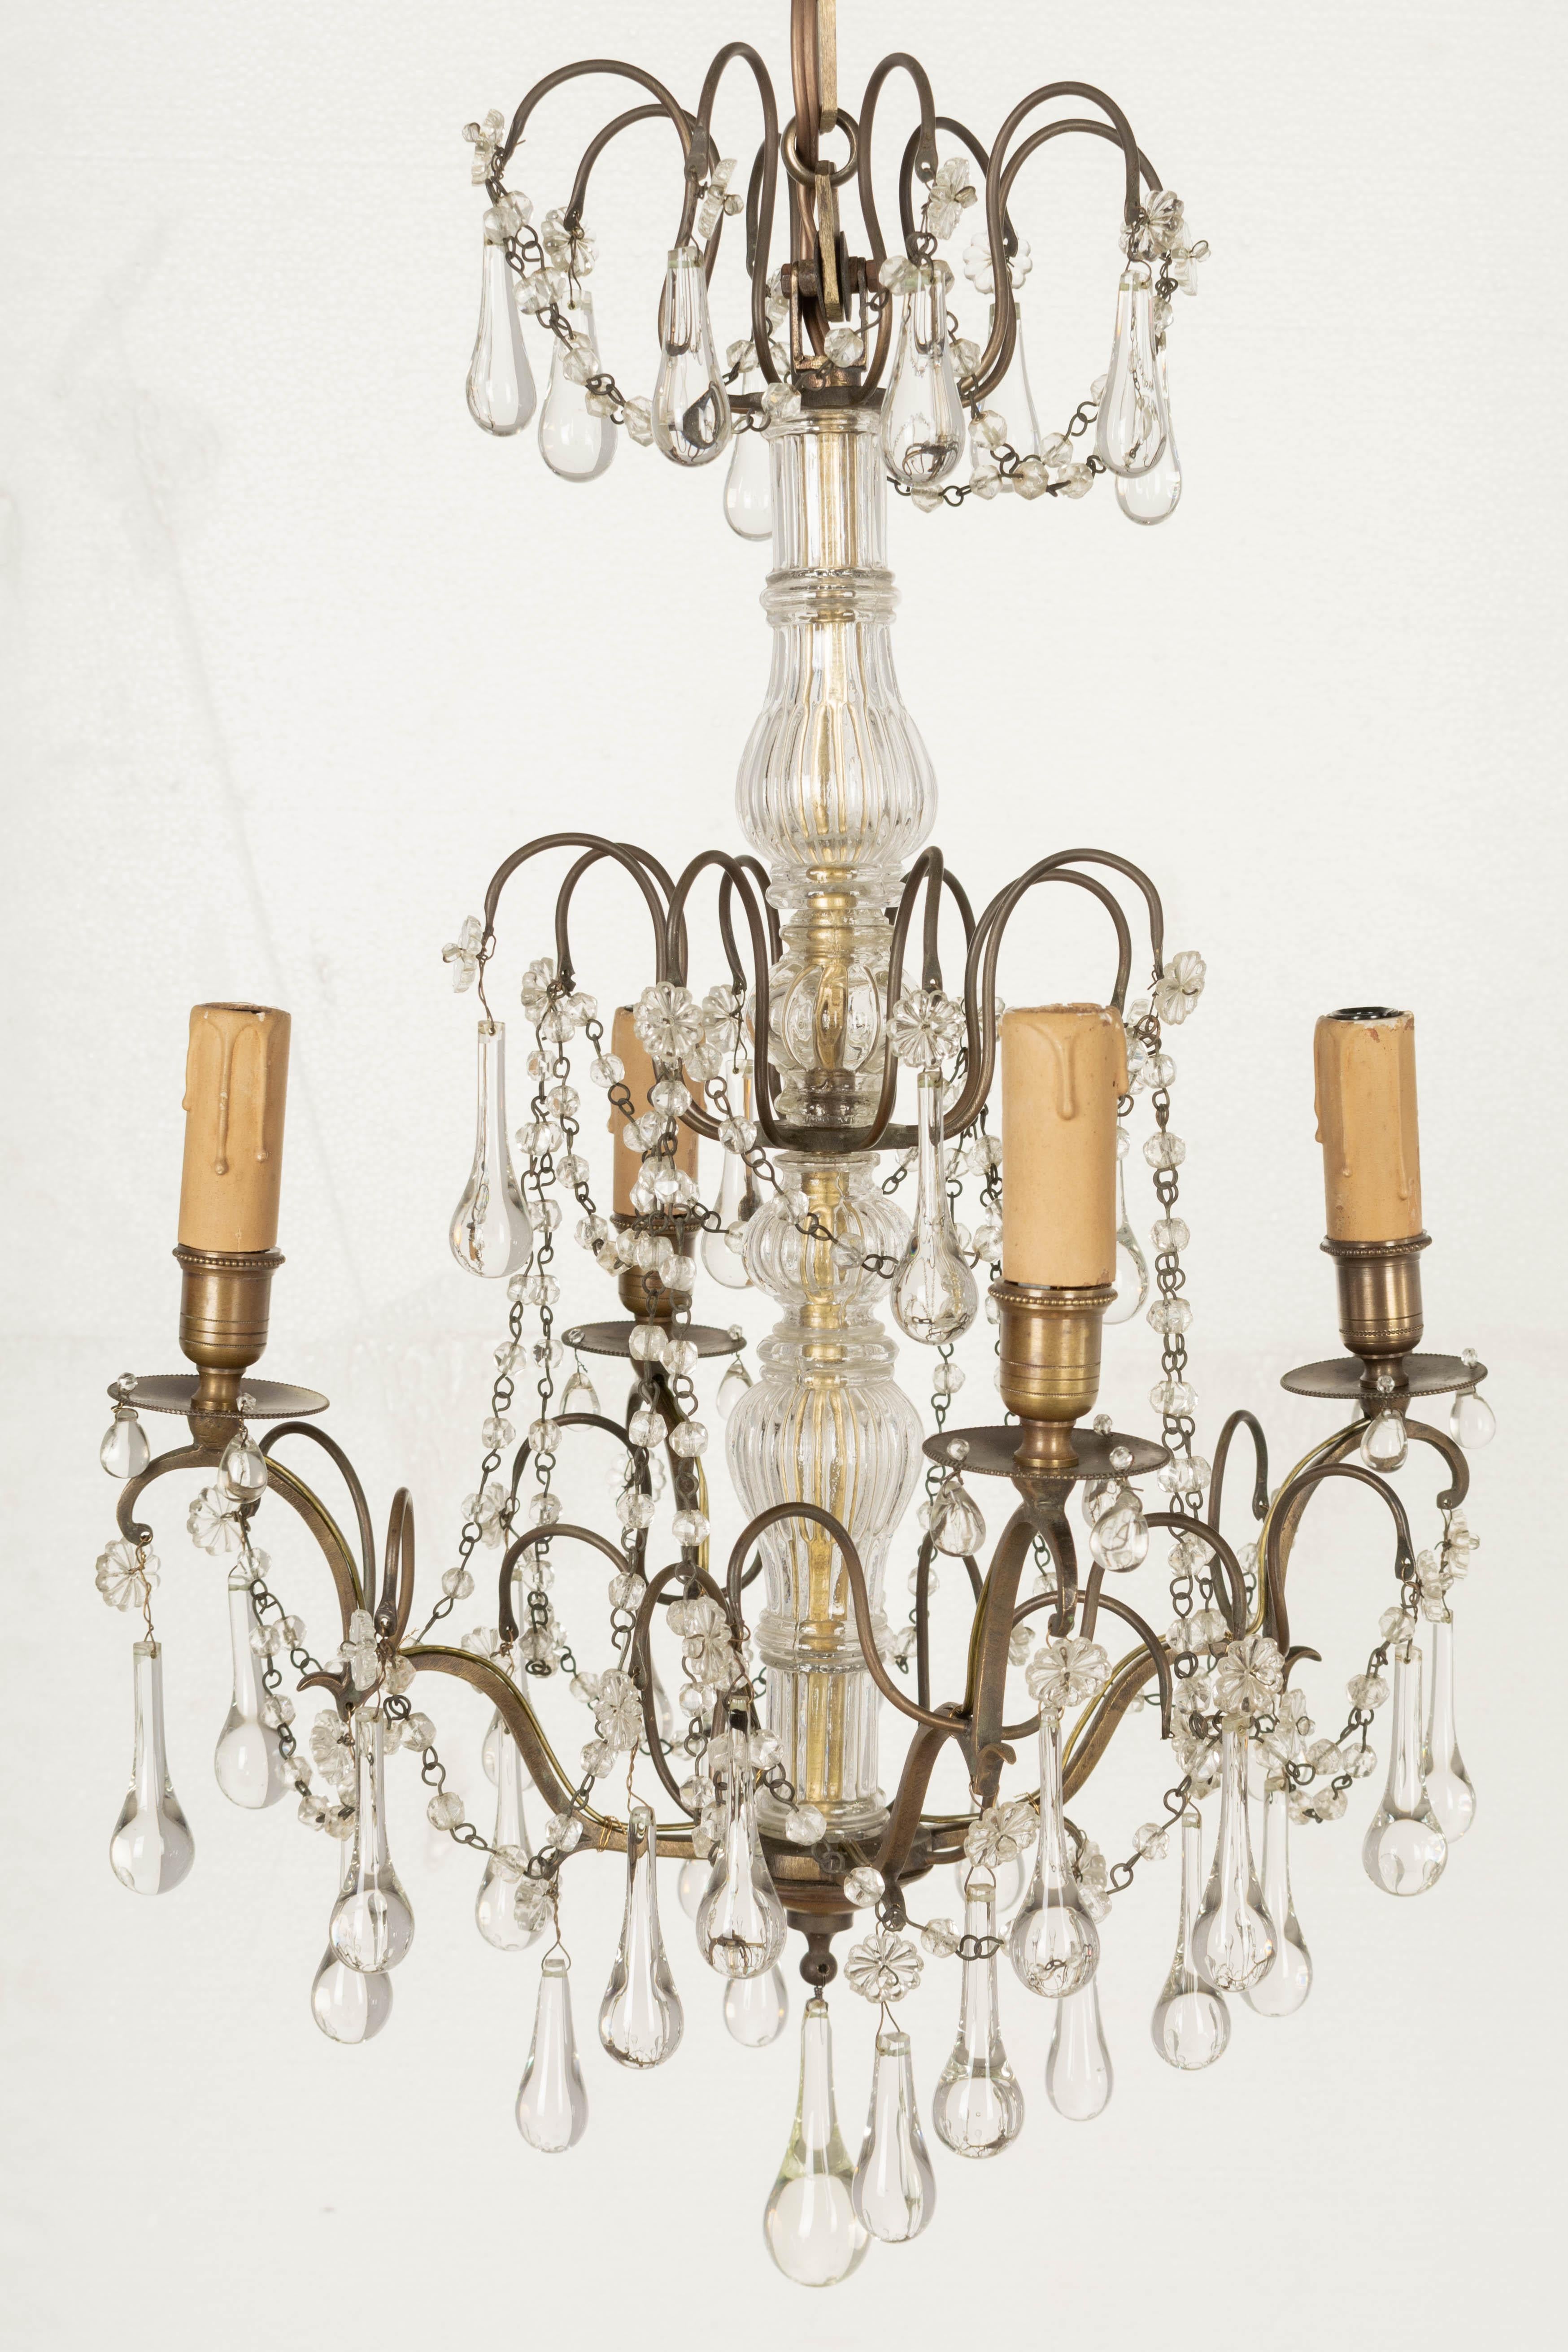 A French Louis XV style four-light brass chandelier with glass center columns and clear crystal teardrops with rosettes. Original candle covers. Rewired with new sockets. Circa 1900-1920.
24